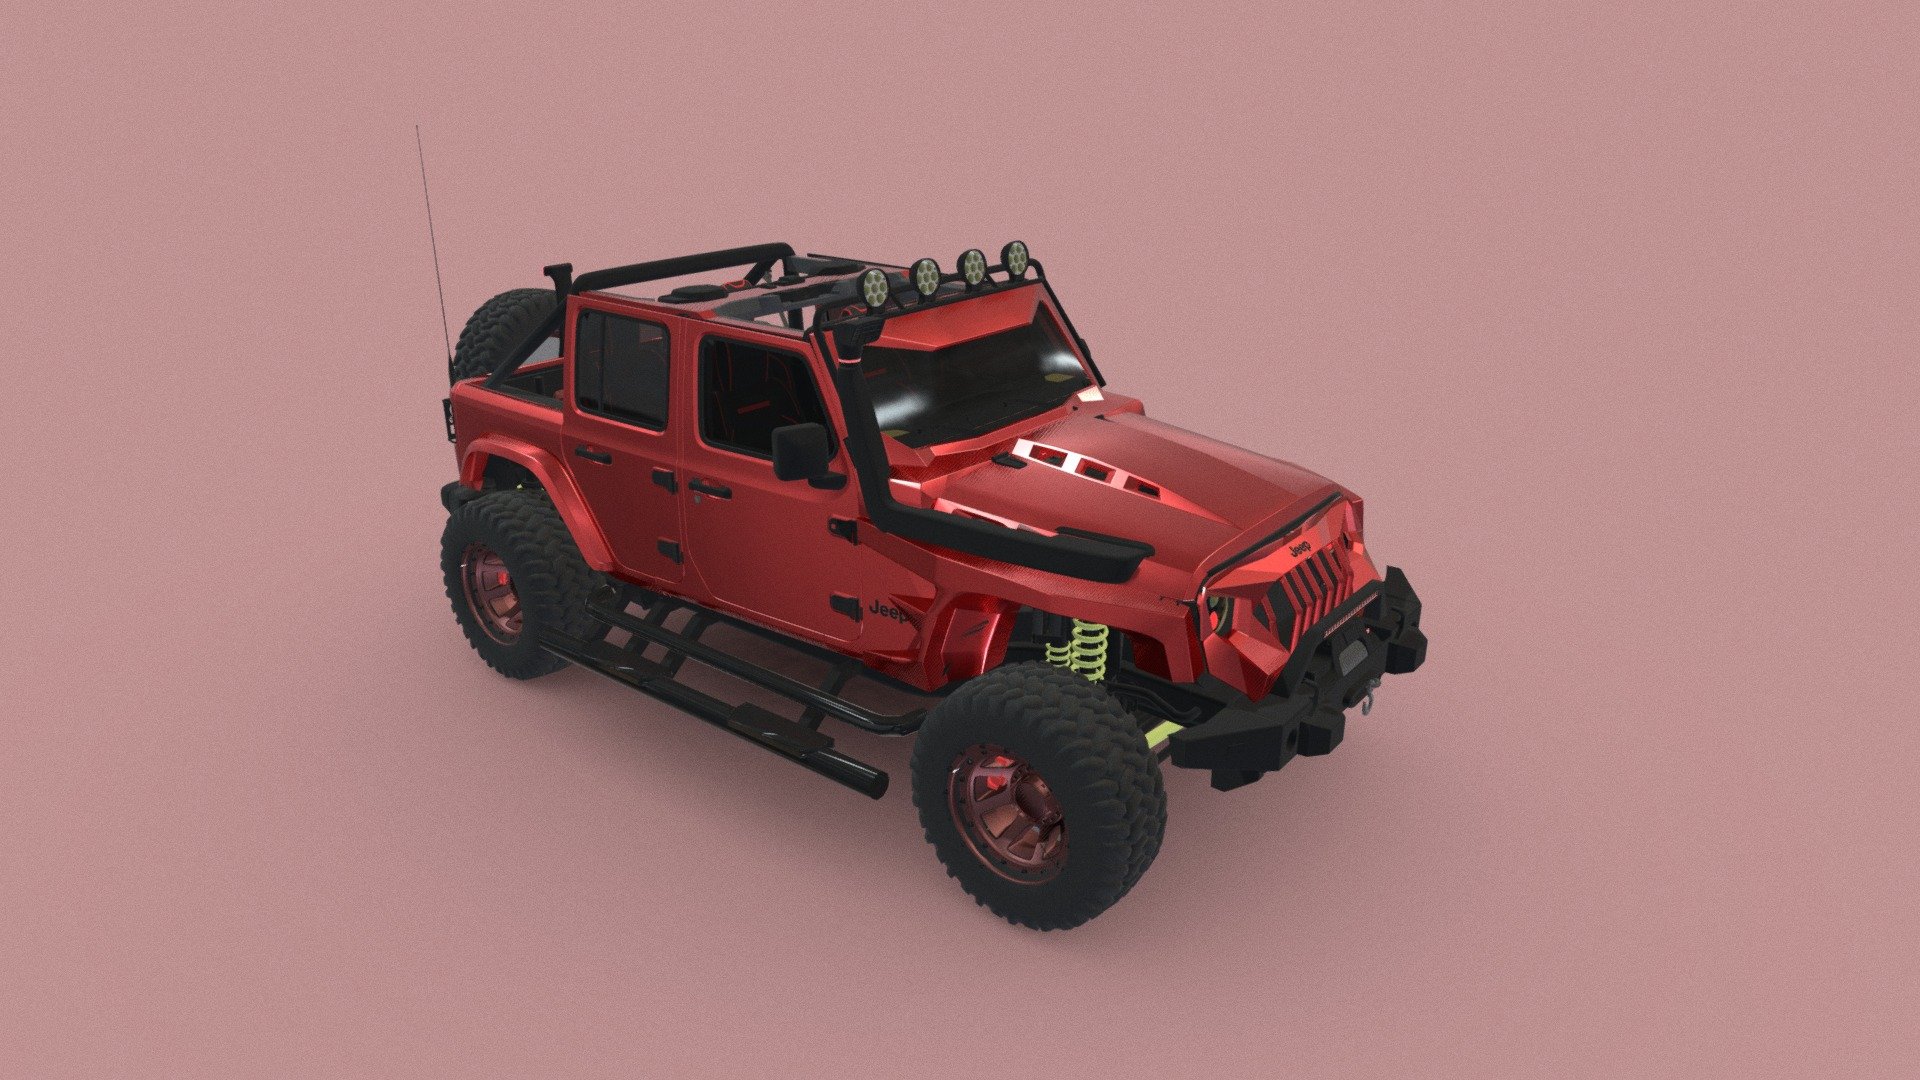 Jeep Wrangler with custom bodykits, guards, and snorkel with a offroad look 3d model